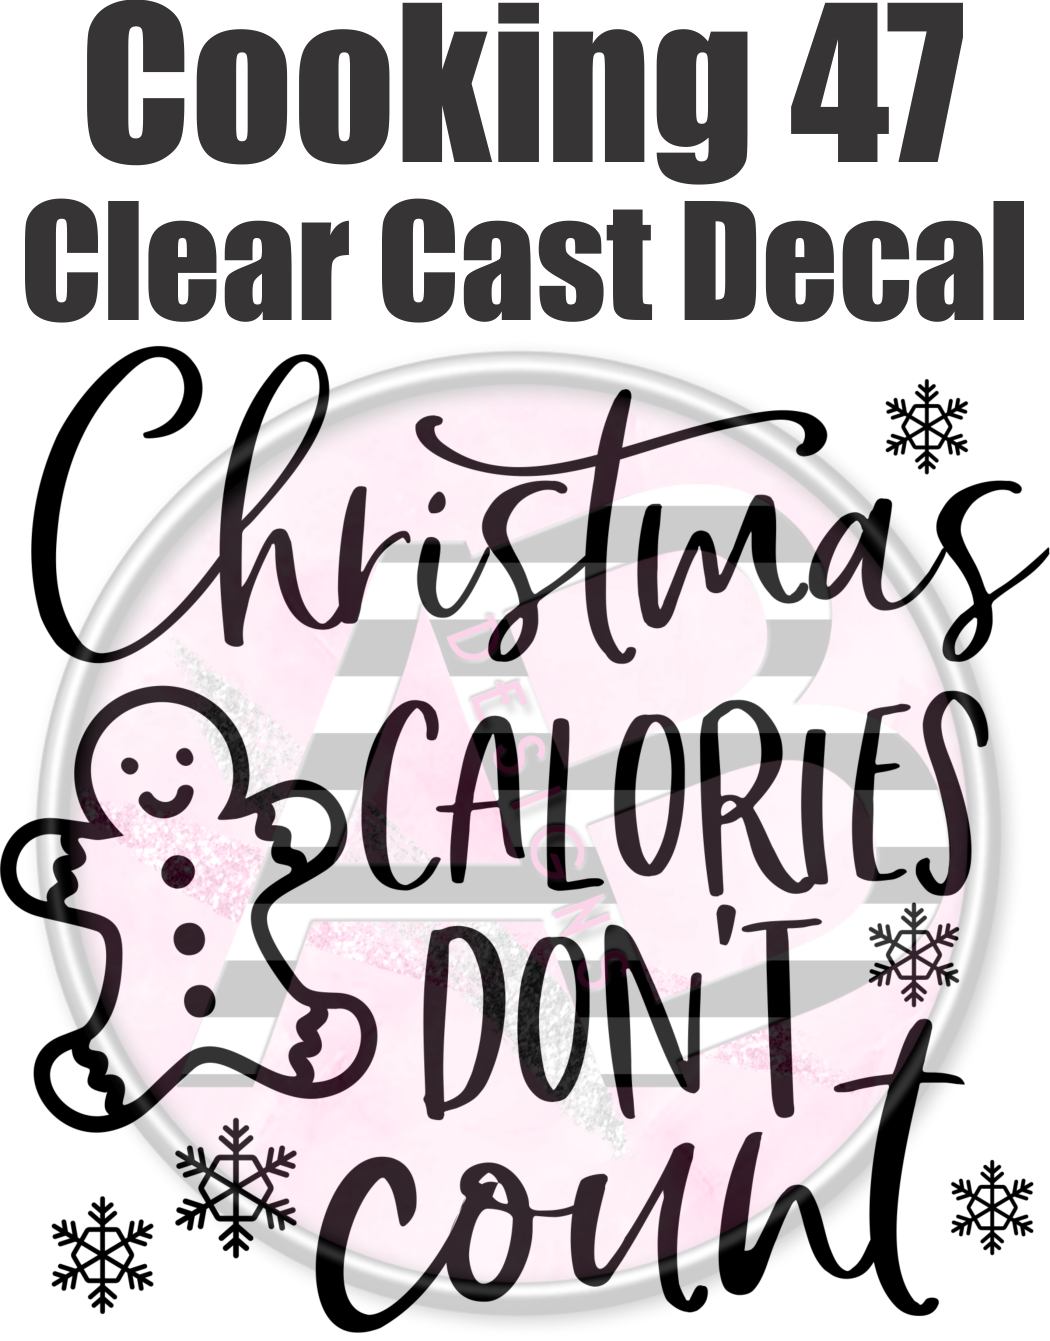 Cooking 47 - Clear Cast Decal - 195